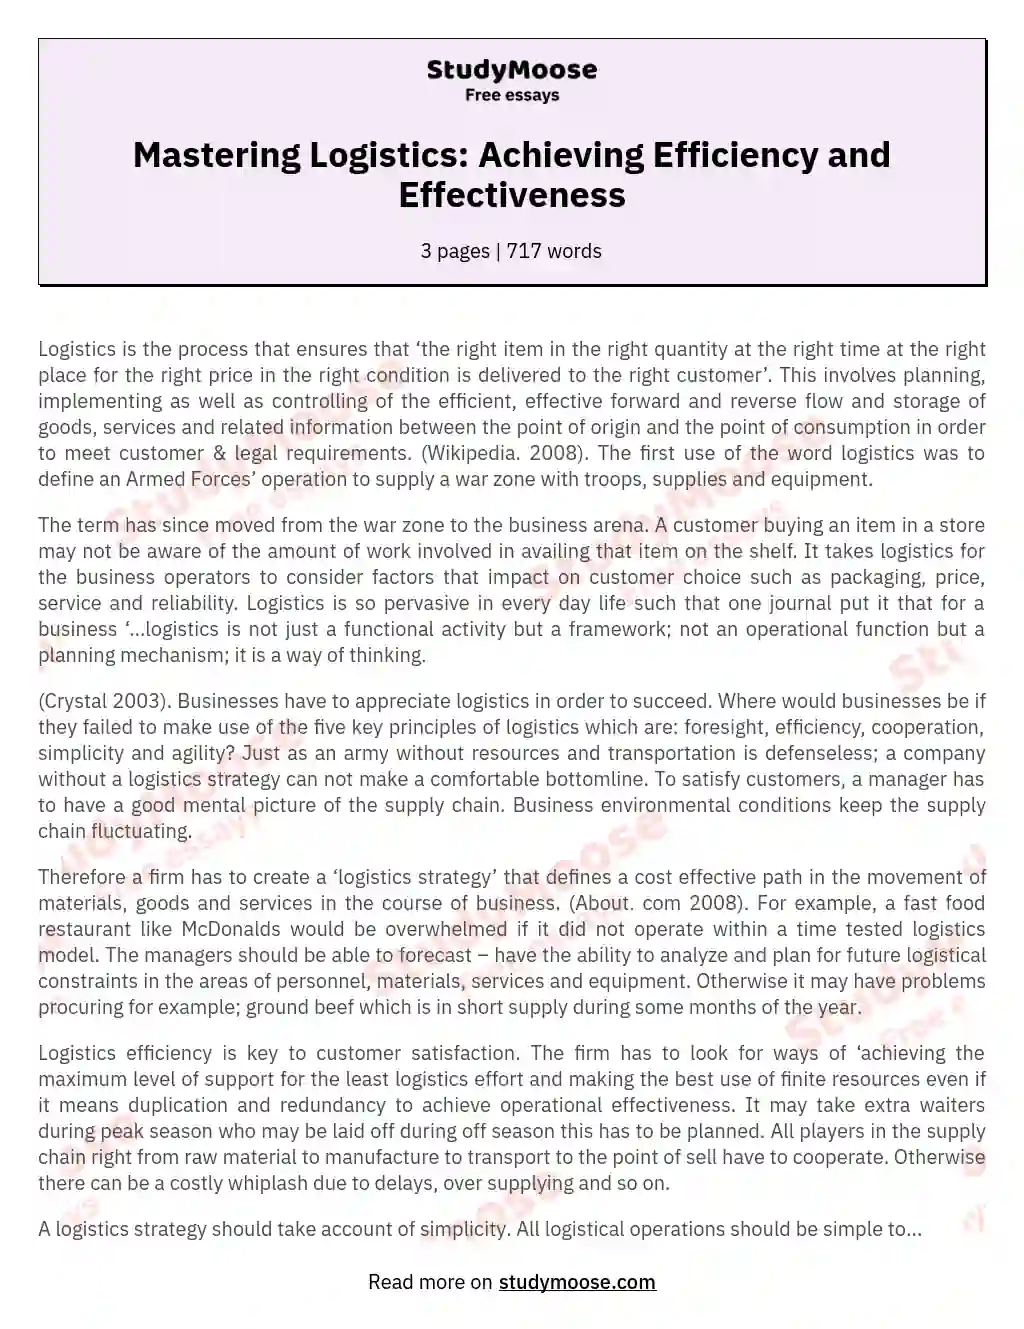 Mastering Logistics: Achieving Efficiency and Effectiveness essay